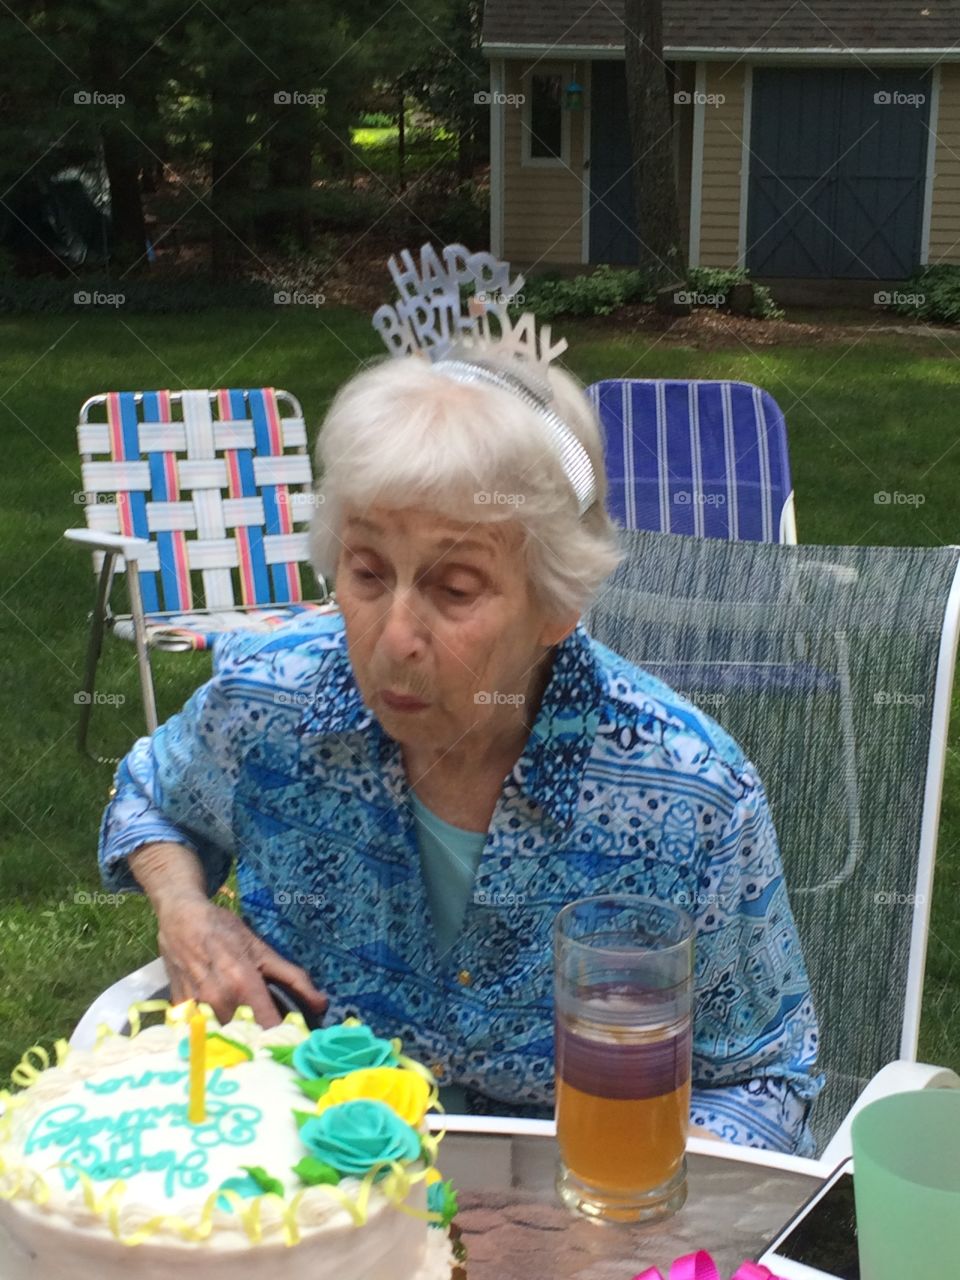 90th Birthday. My grandmother just celebrated her 90th birthday. The whole family gathered for this day.